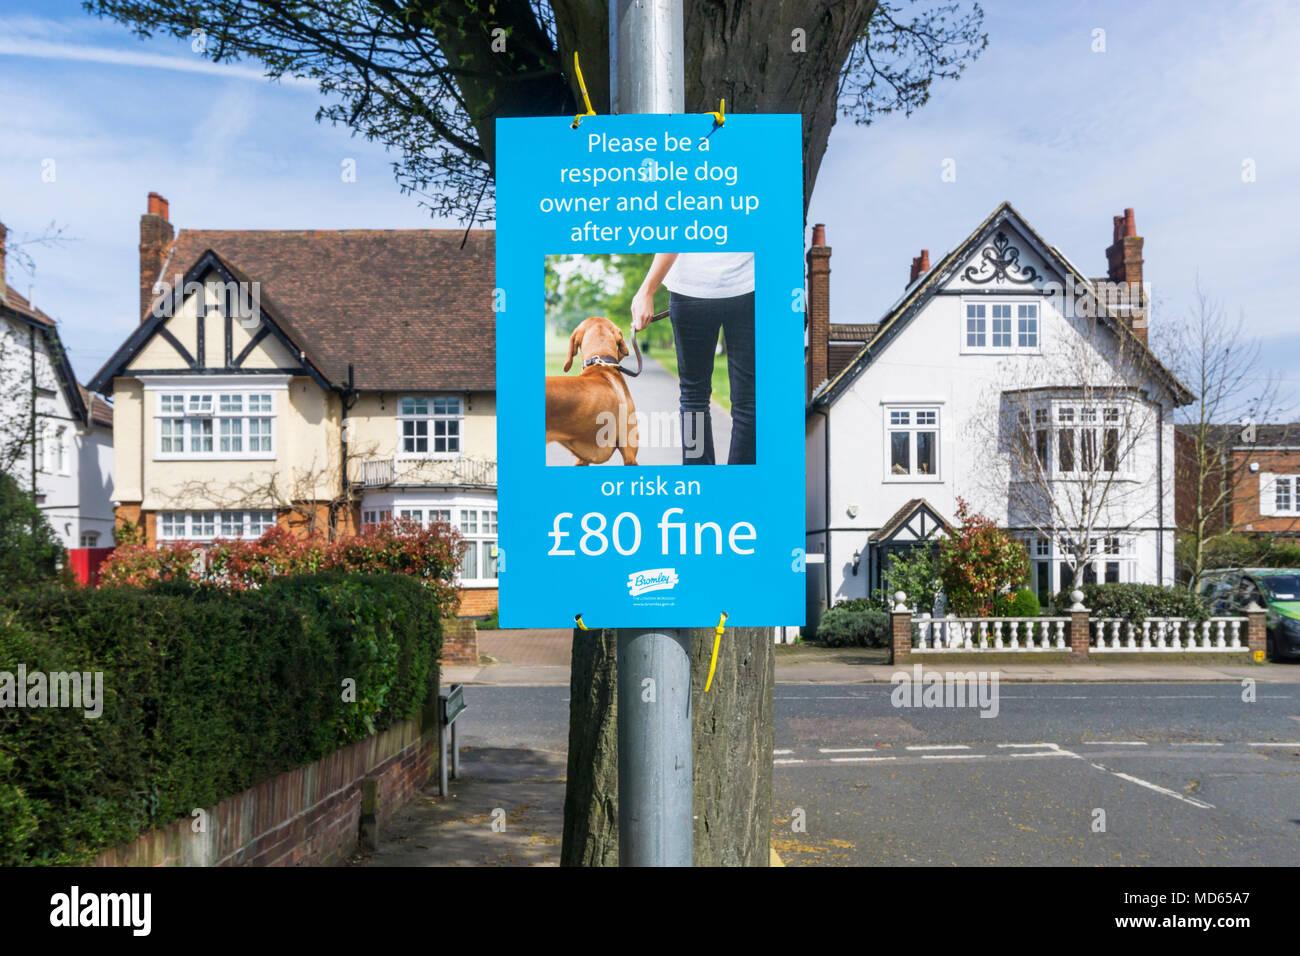 A sign in a suburban street warns people of an £80 fine for failing to clean up after their dog. Stock Photo